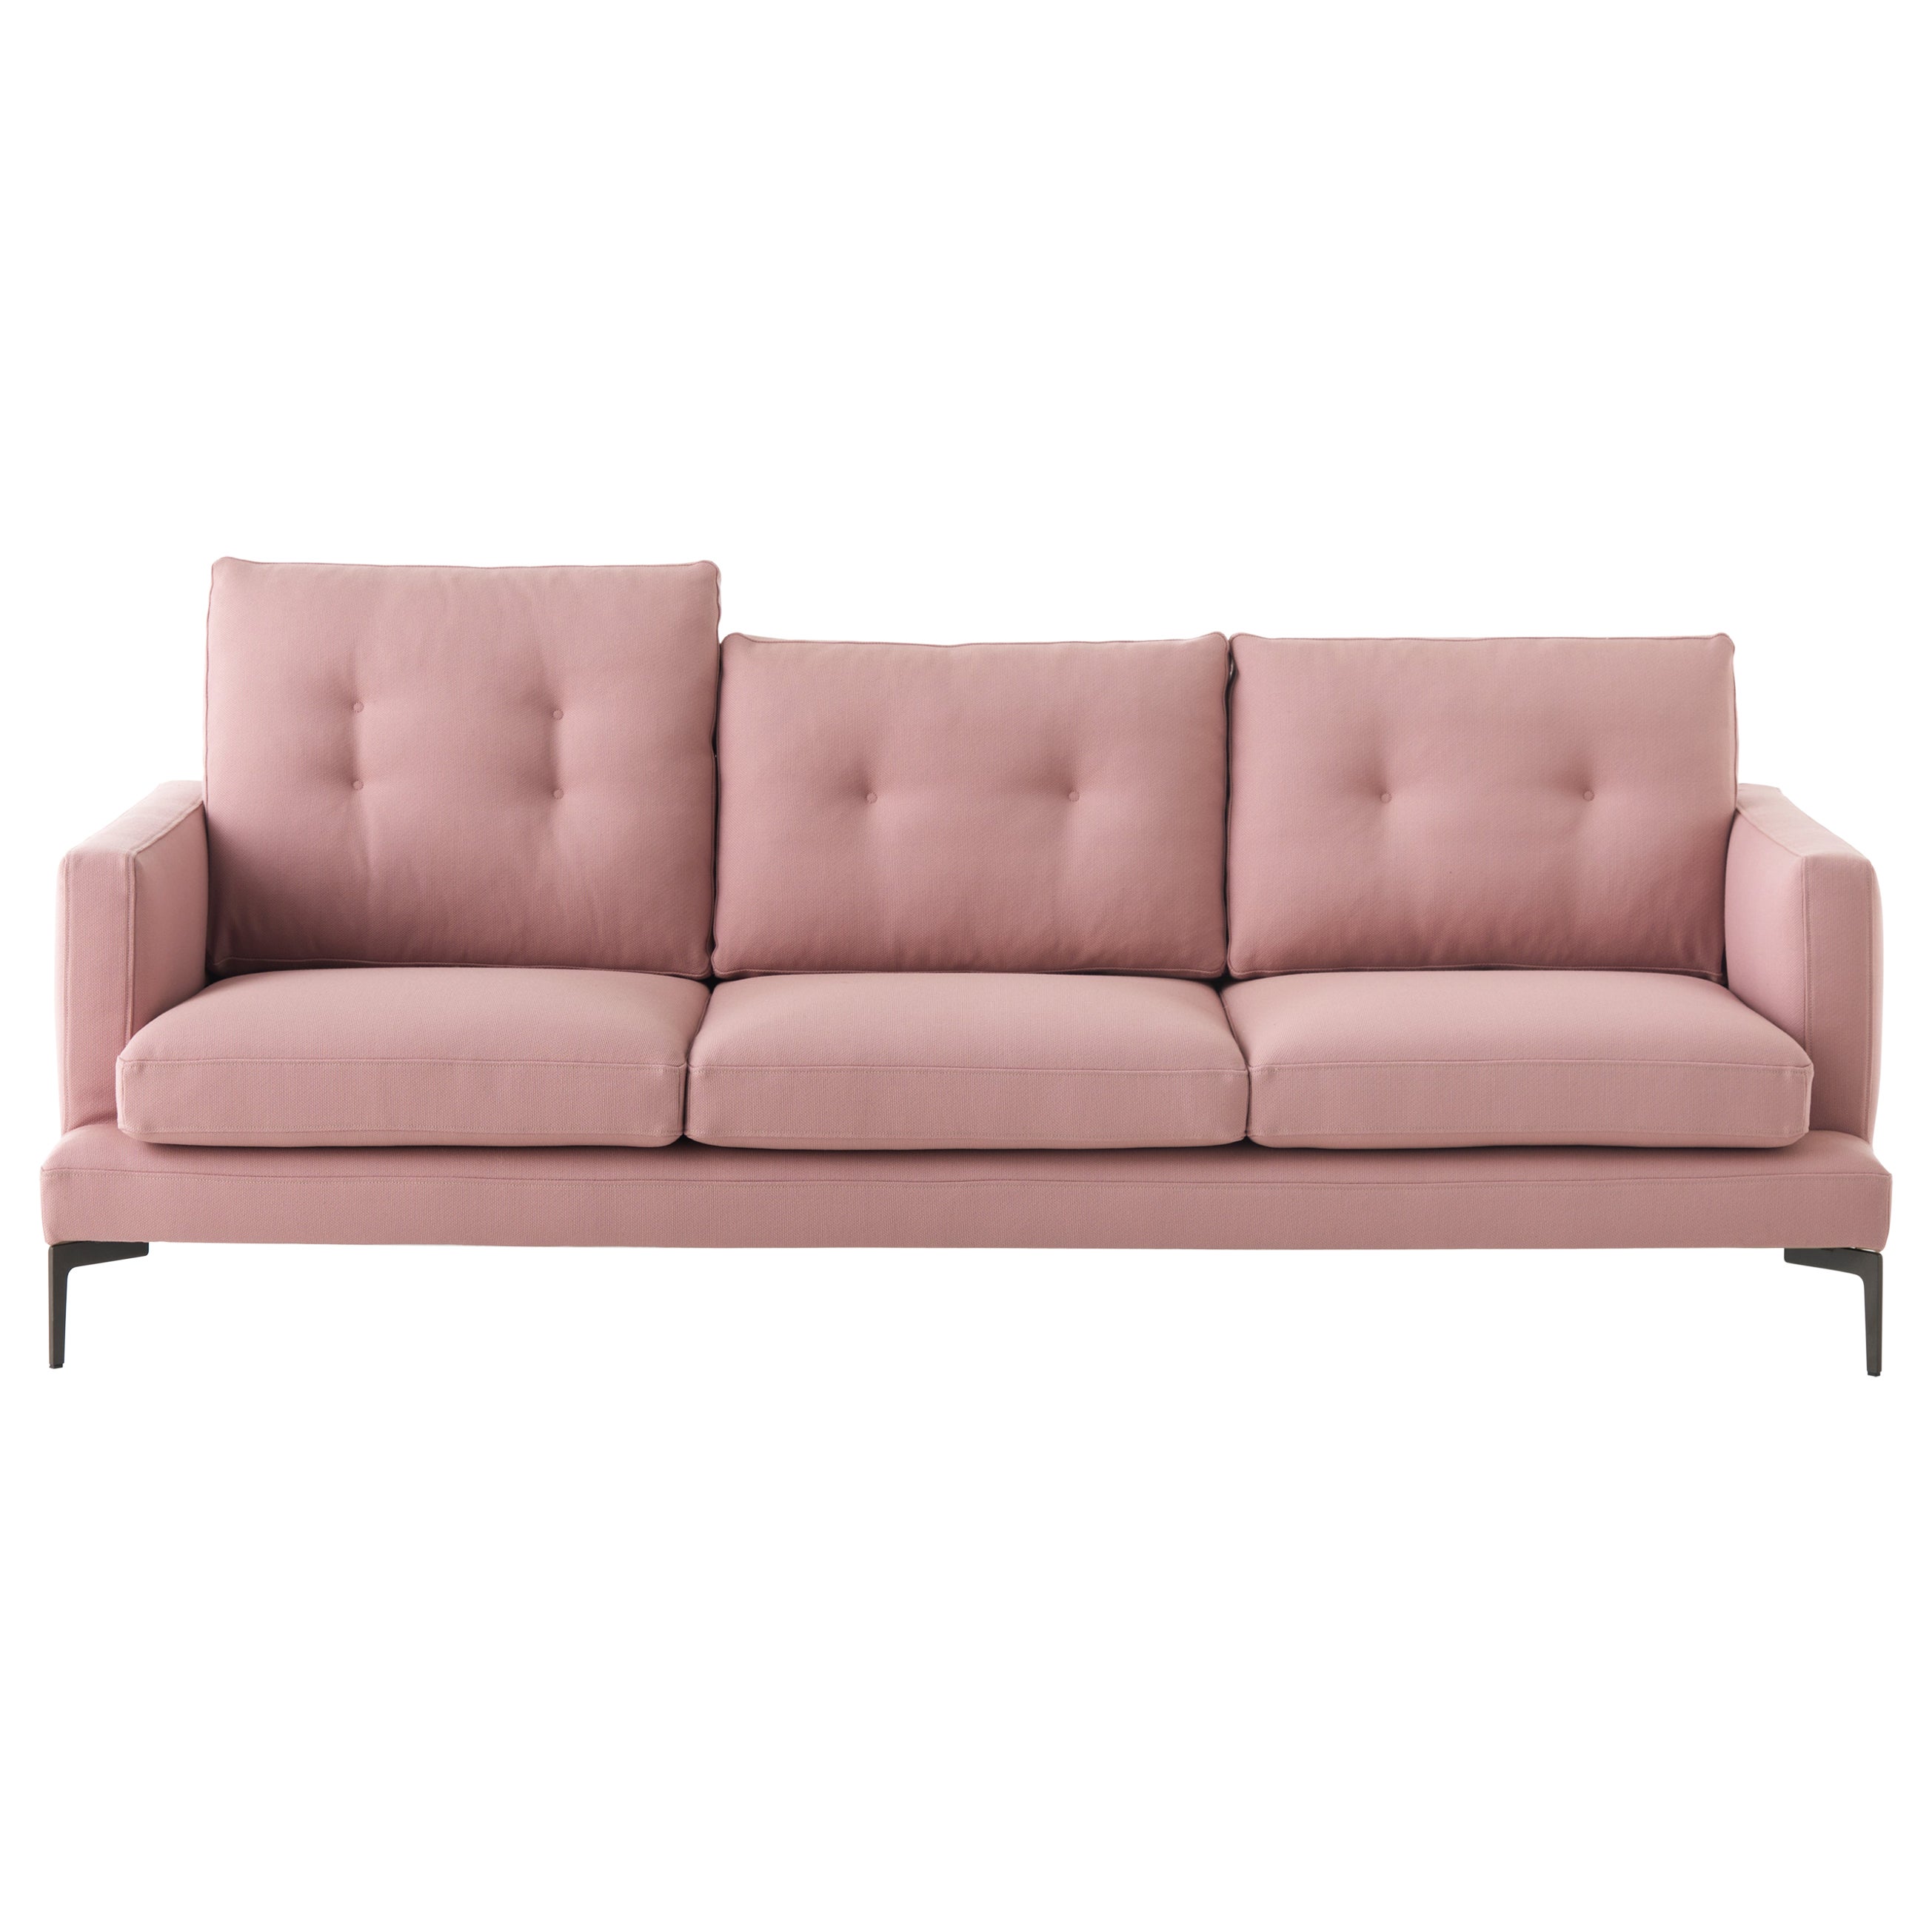 Essentiel 3-Seat 220 High Cushion Sofa in Braided Pink Upholstery, Sergio Bicego For Sale